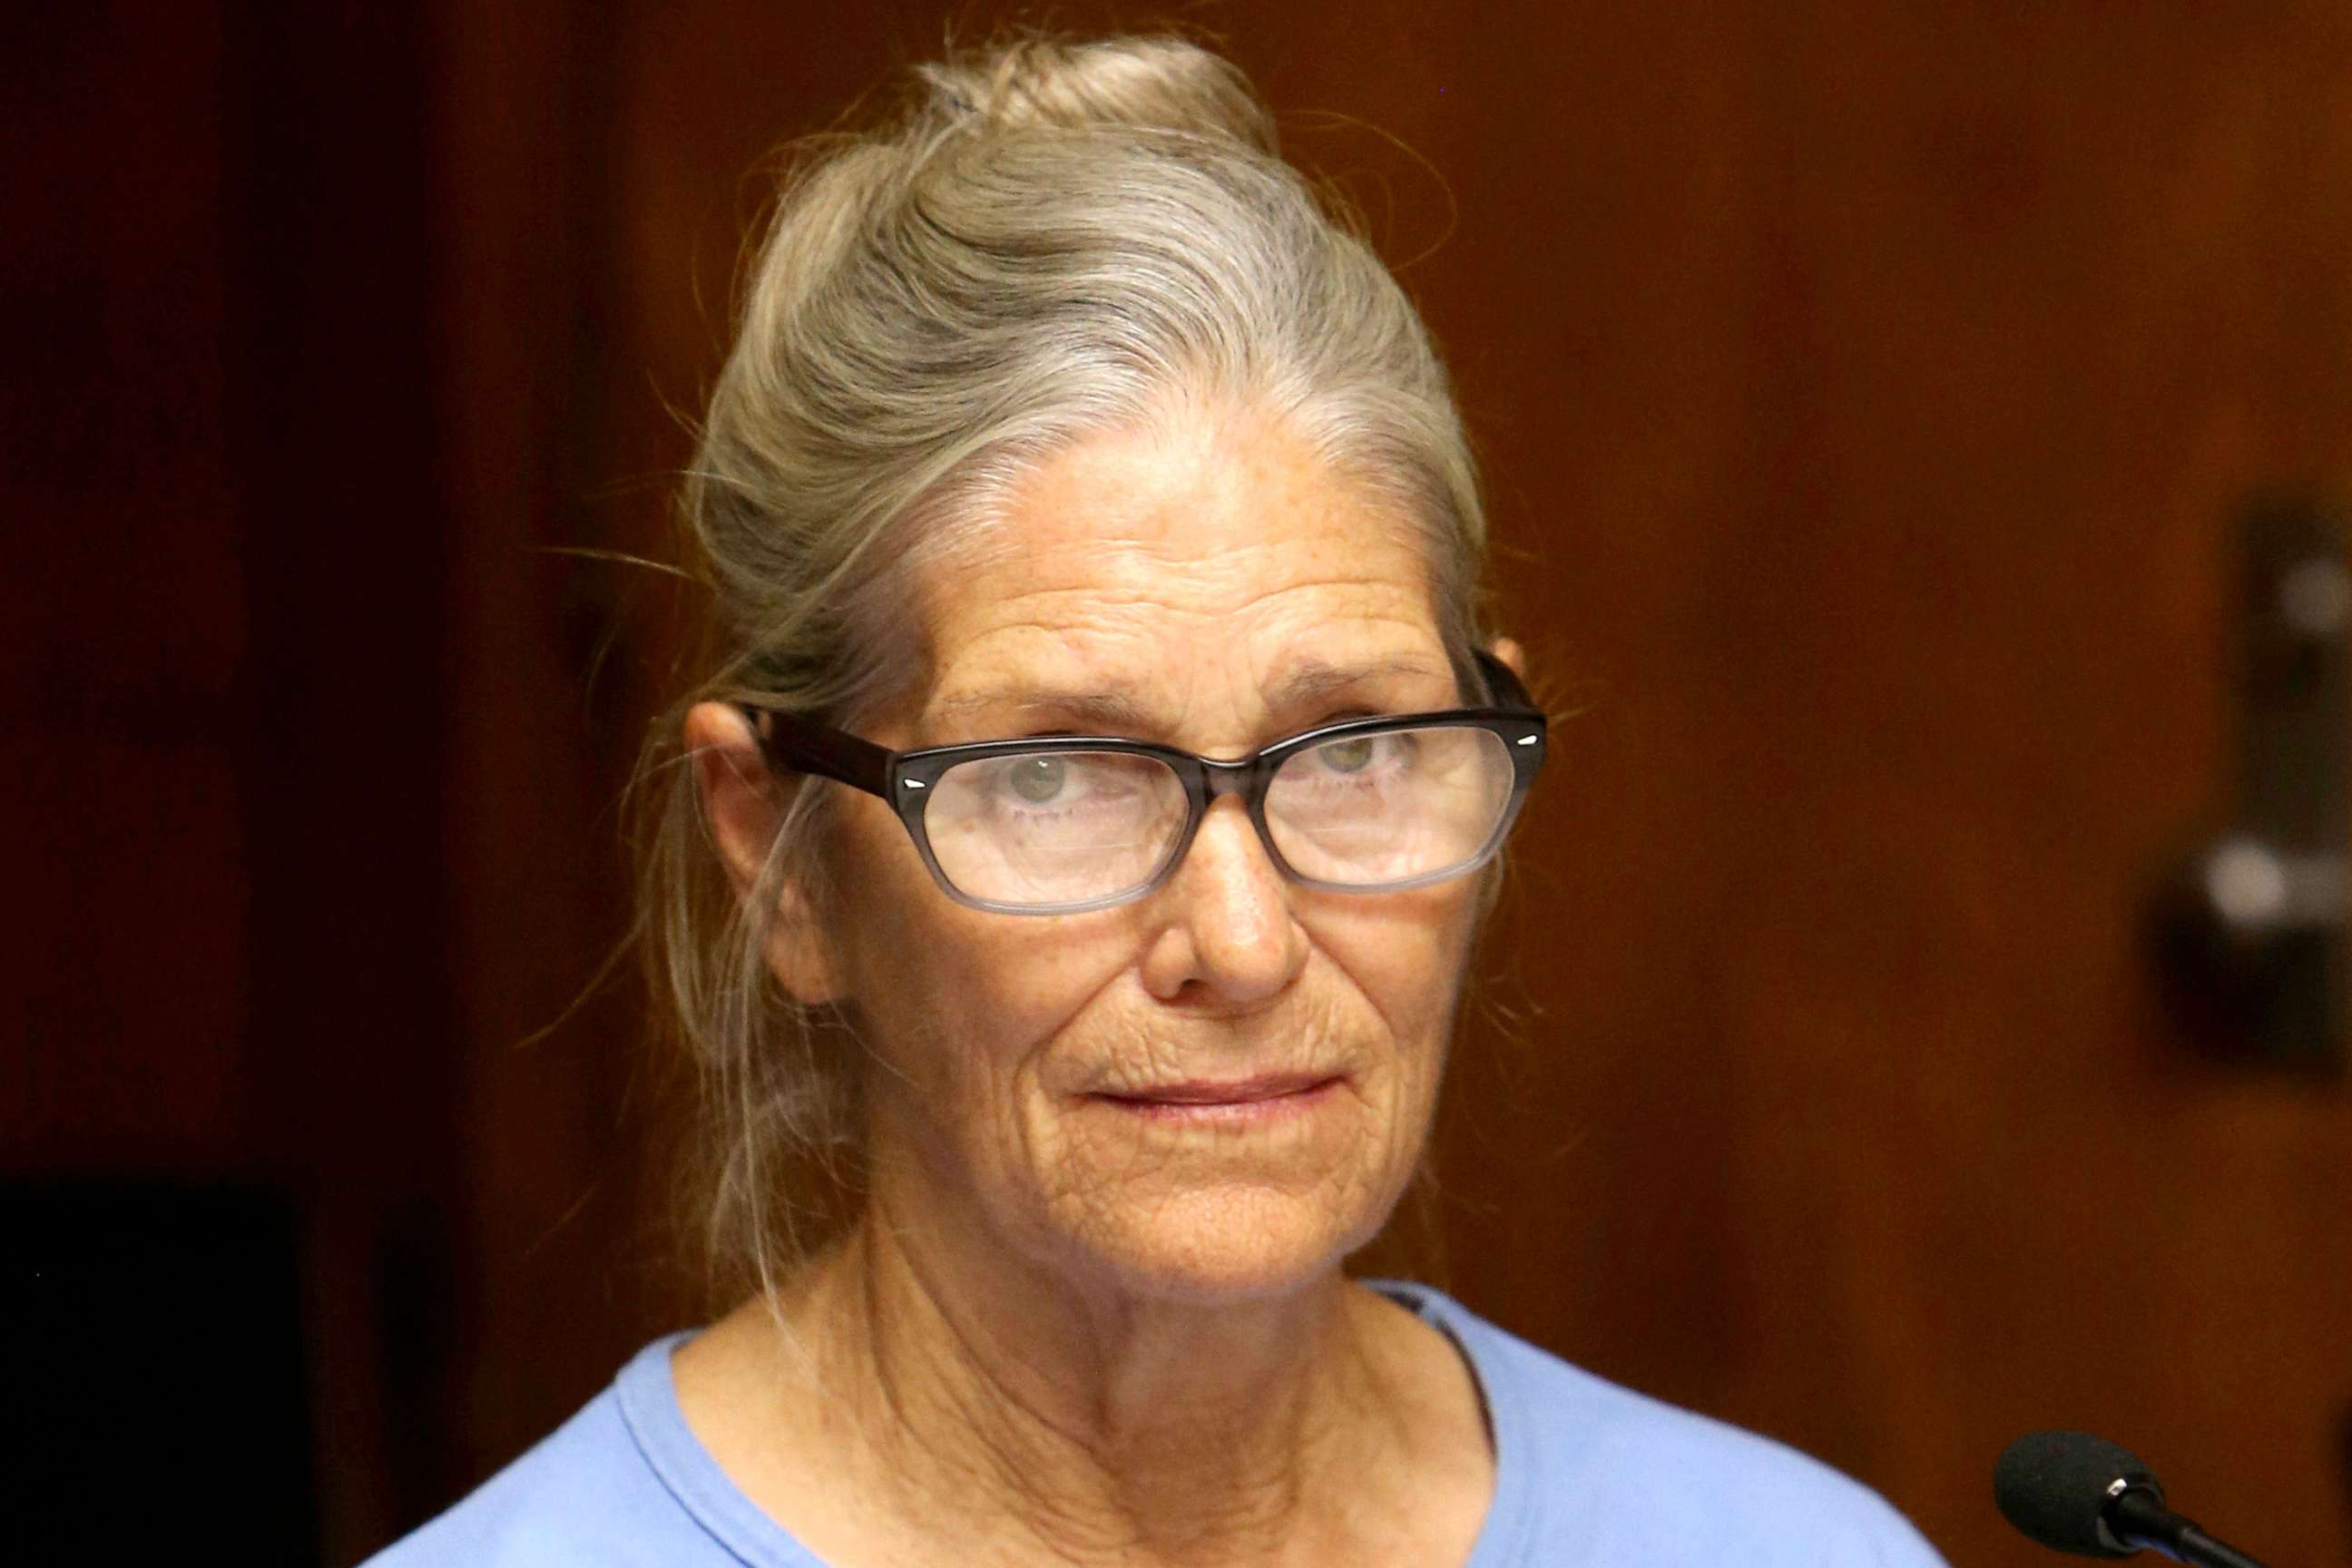 PHOTO: Leslie Van Houten attends her parole hearing at the California Institution for Women Sept. 6, 2017 in Corona, Calif.